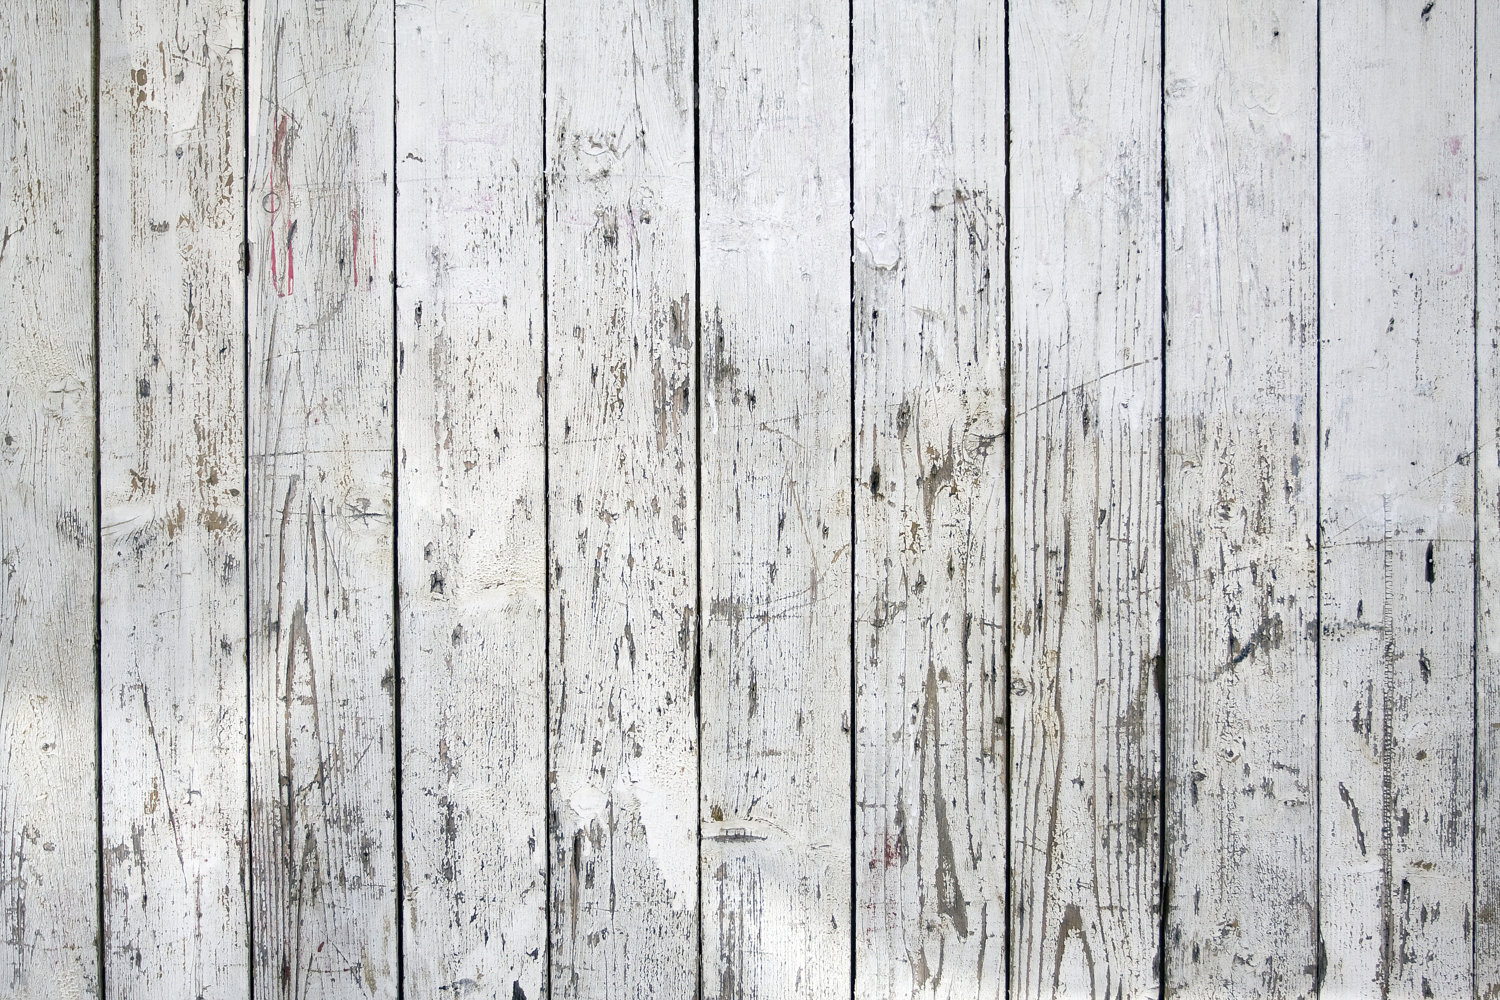 Black And White Wood Paneling - HD Wallpaper 